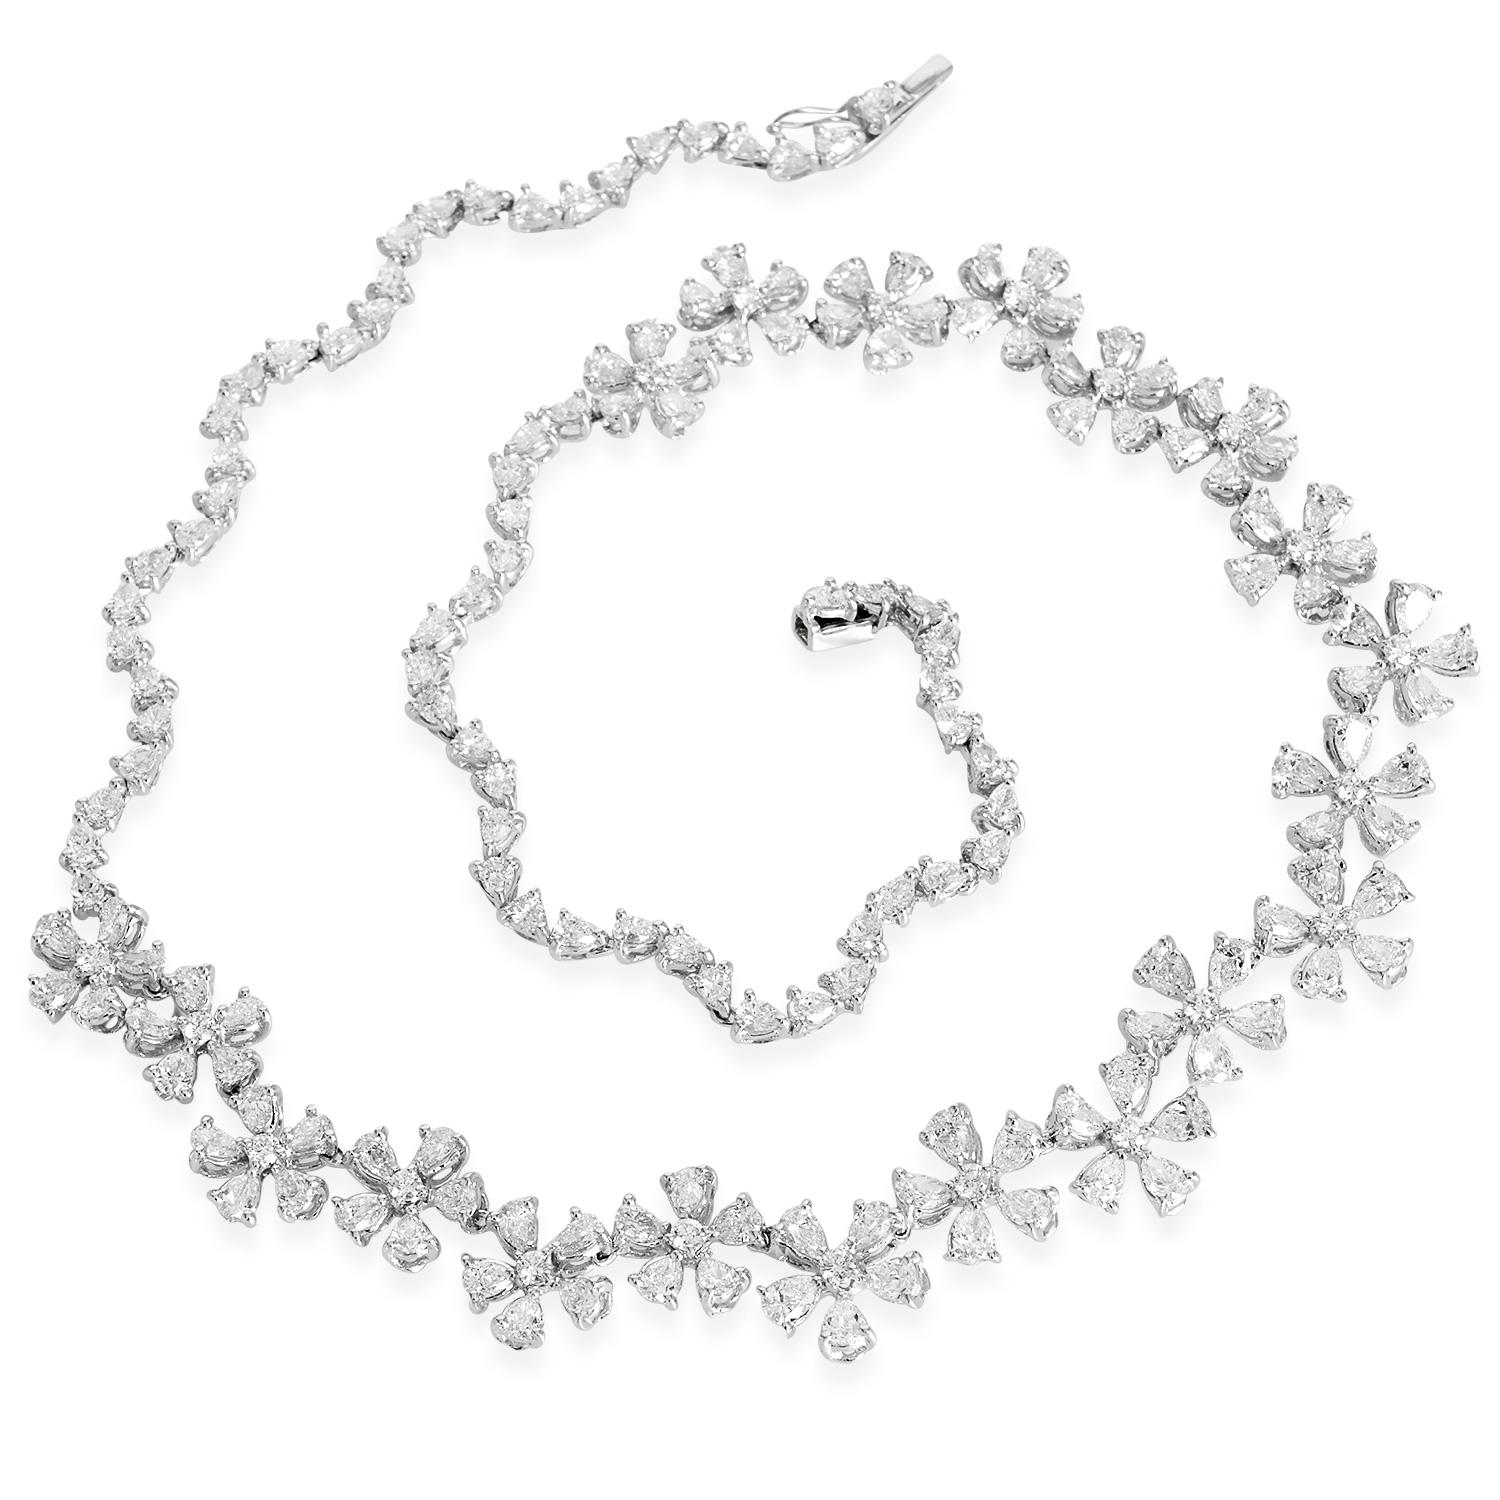 Estate ZYDO Diamond 18K Gold Floral Link Tennis Statement Necklace 

A gorgeous floral link Tennis necklace made in 18K White gold with Natural Pear and Round Diamonds. Half Floral Links and Half Wavey pear Links near the clasp. It is an all-rounder